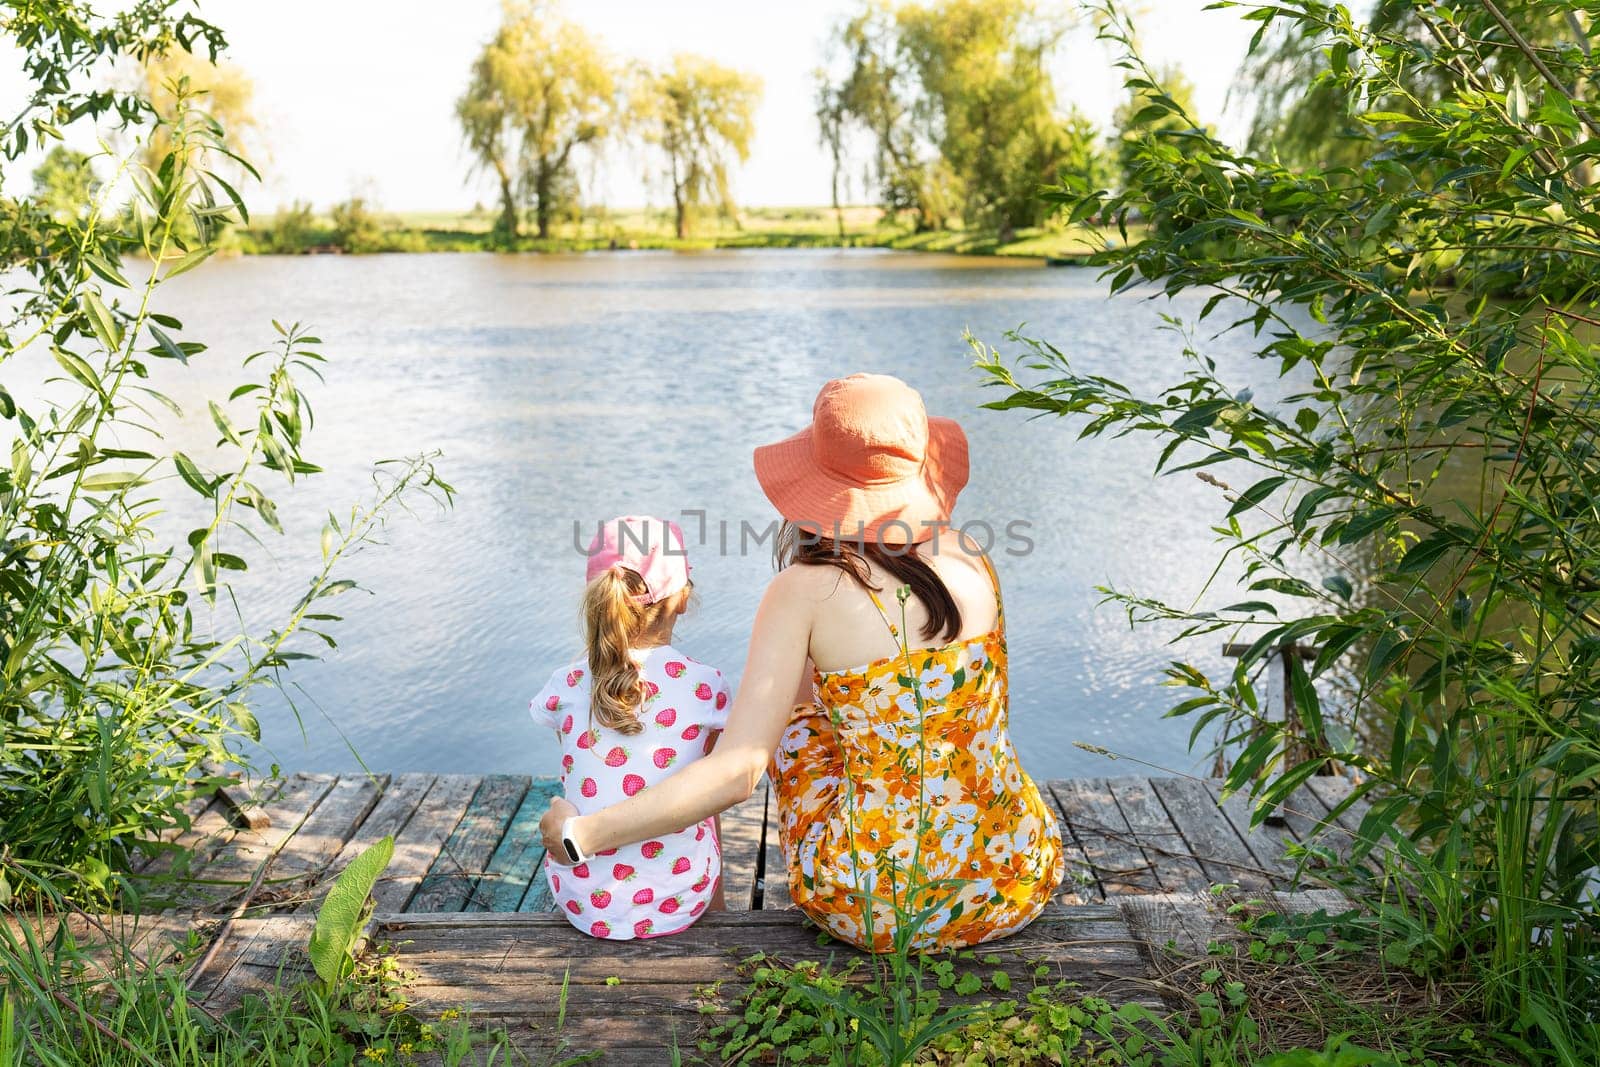 Mother and daughter sit by a serene lake surrounded by lush greenery, evoking a sense of peace and connection with nature. by sfinks